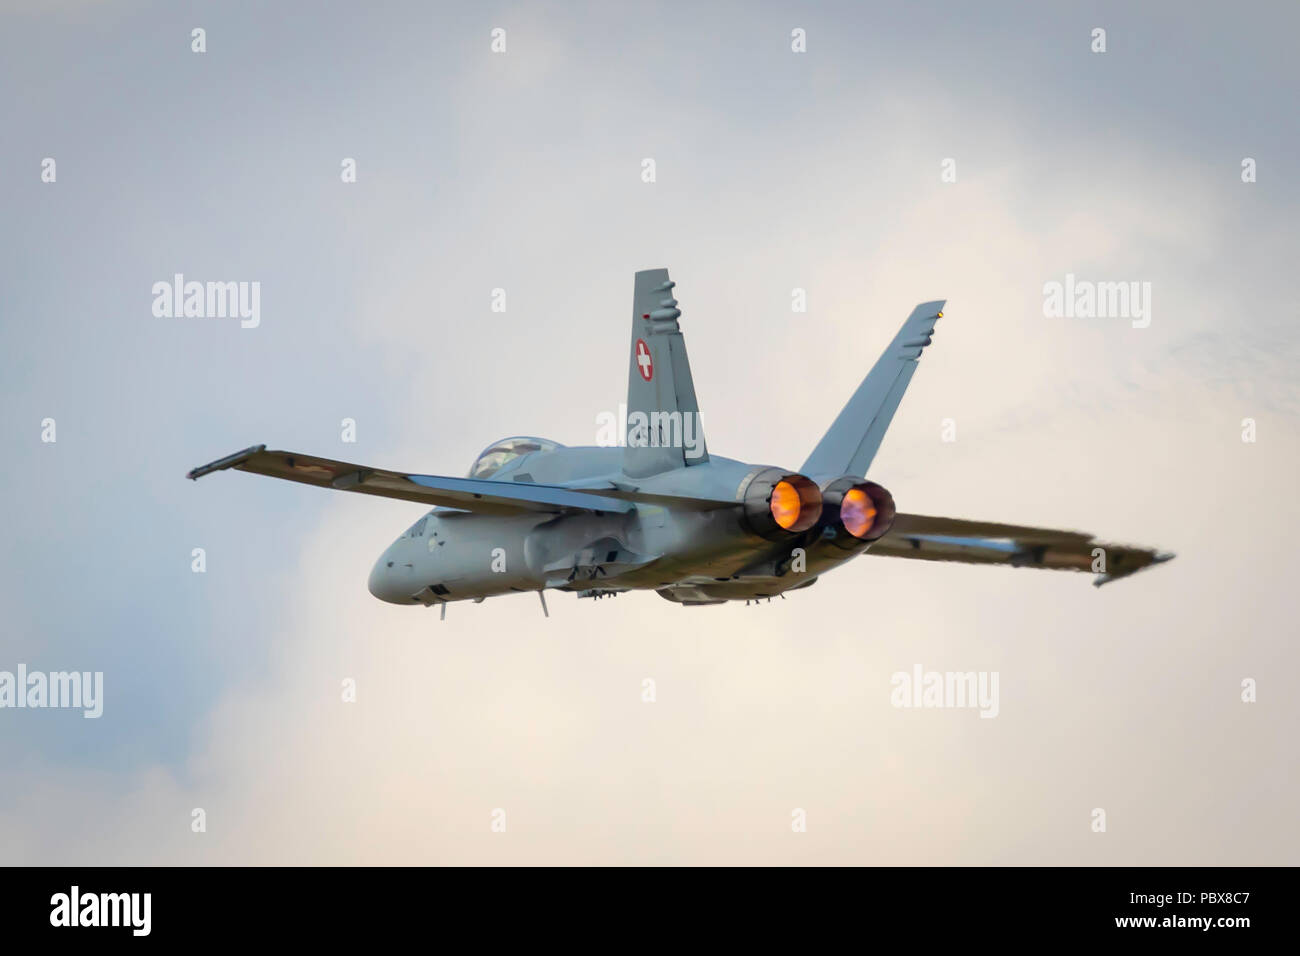 Fairford, Gloucestershire, UK - July 14th, 2018: Swiss Air Force Mcdonnell Douglas F/A-18 Hornet performing its Aerobatic Display at RIAT 2018 Stock Photo